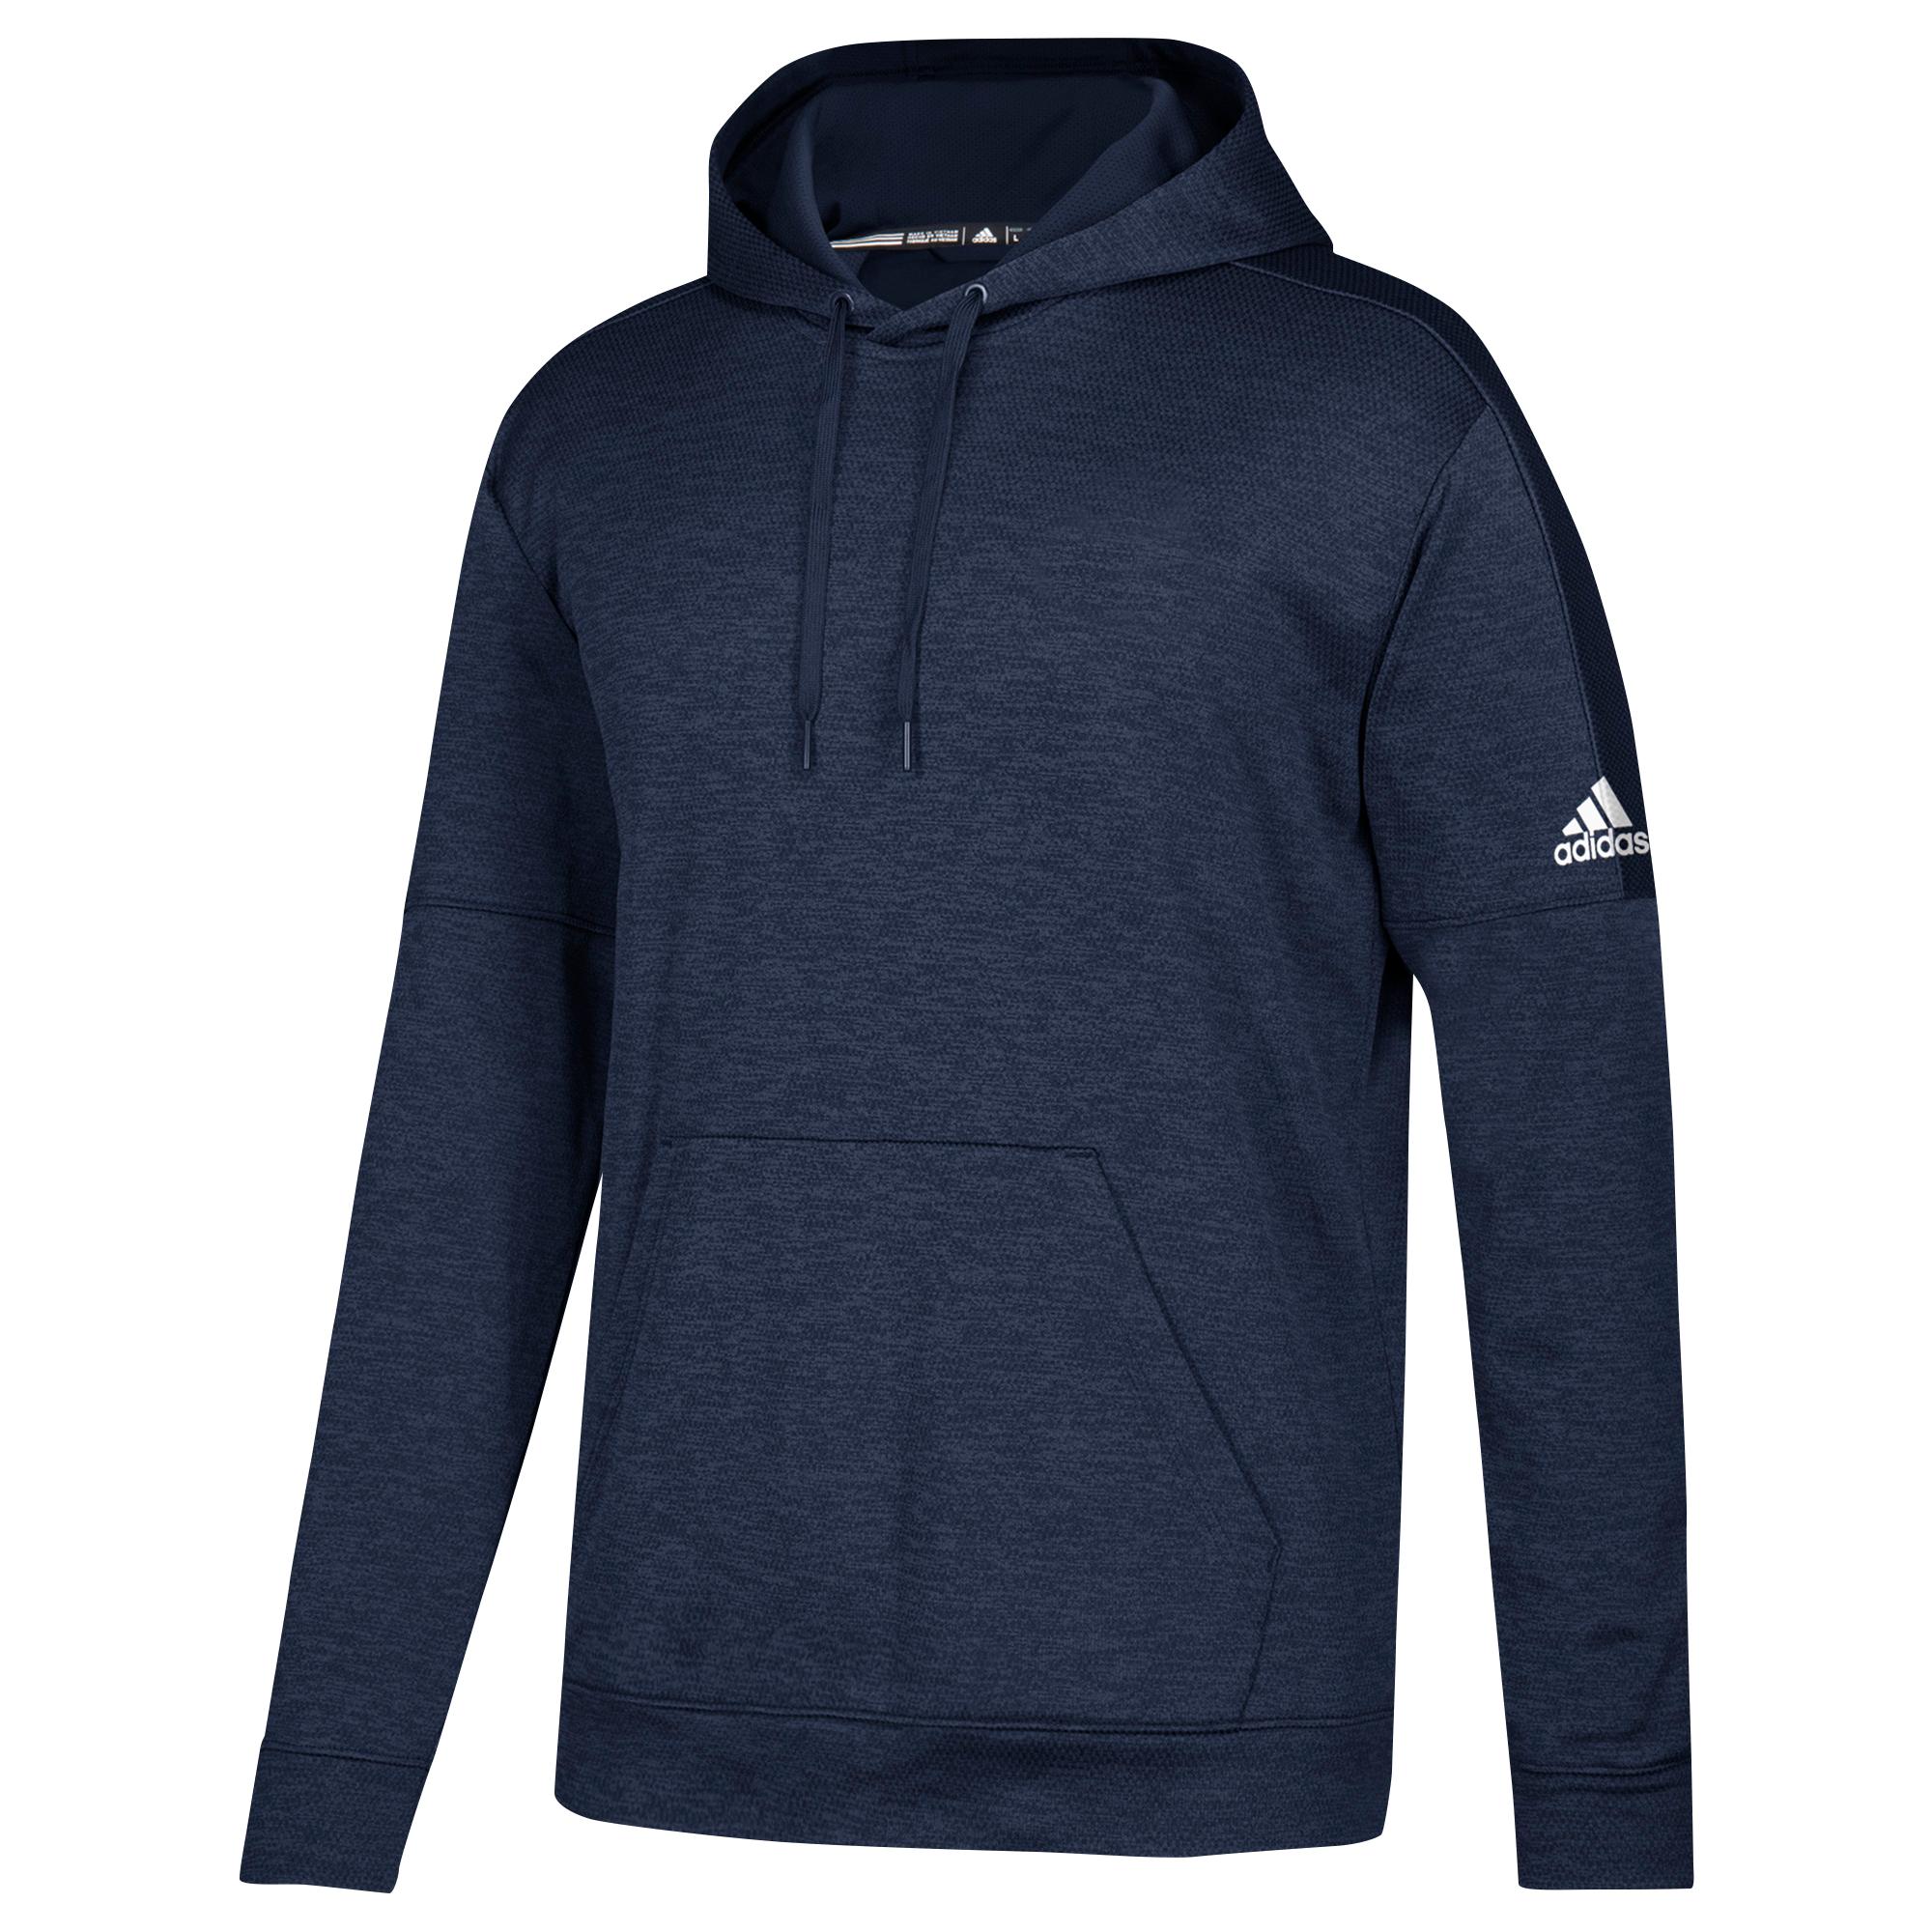 adidas Team Issue Fleece Pullover Hoodie in Blue for Men - Lyst